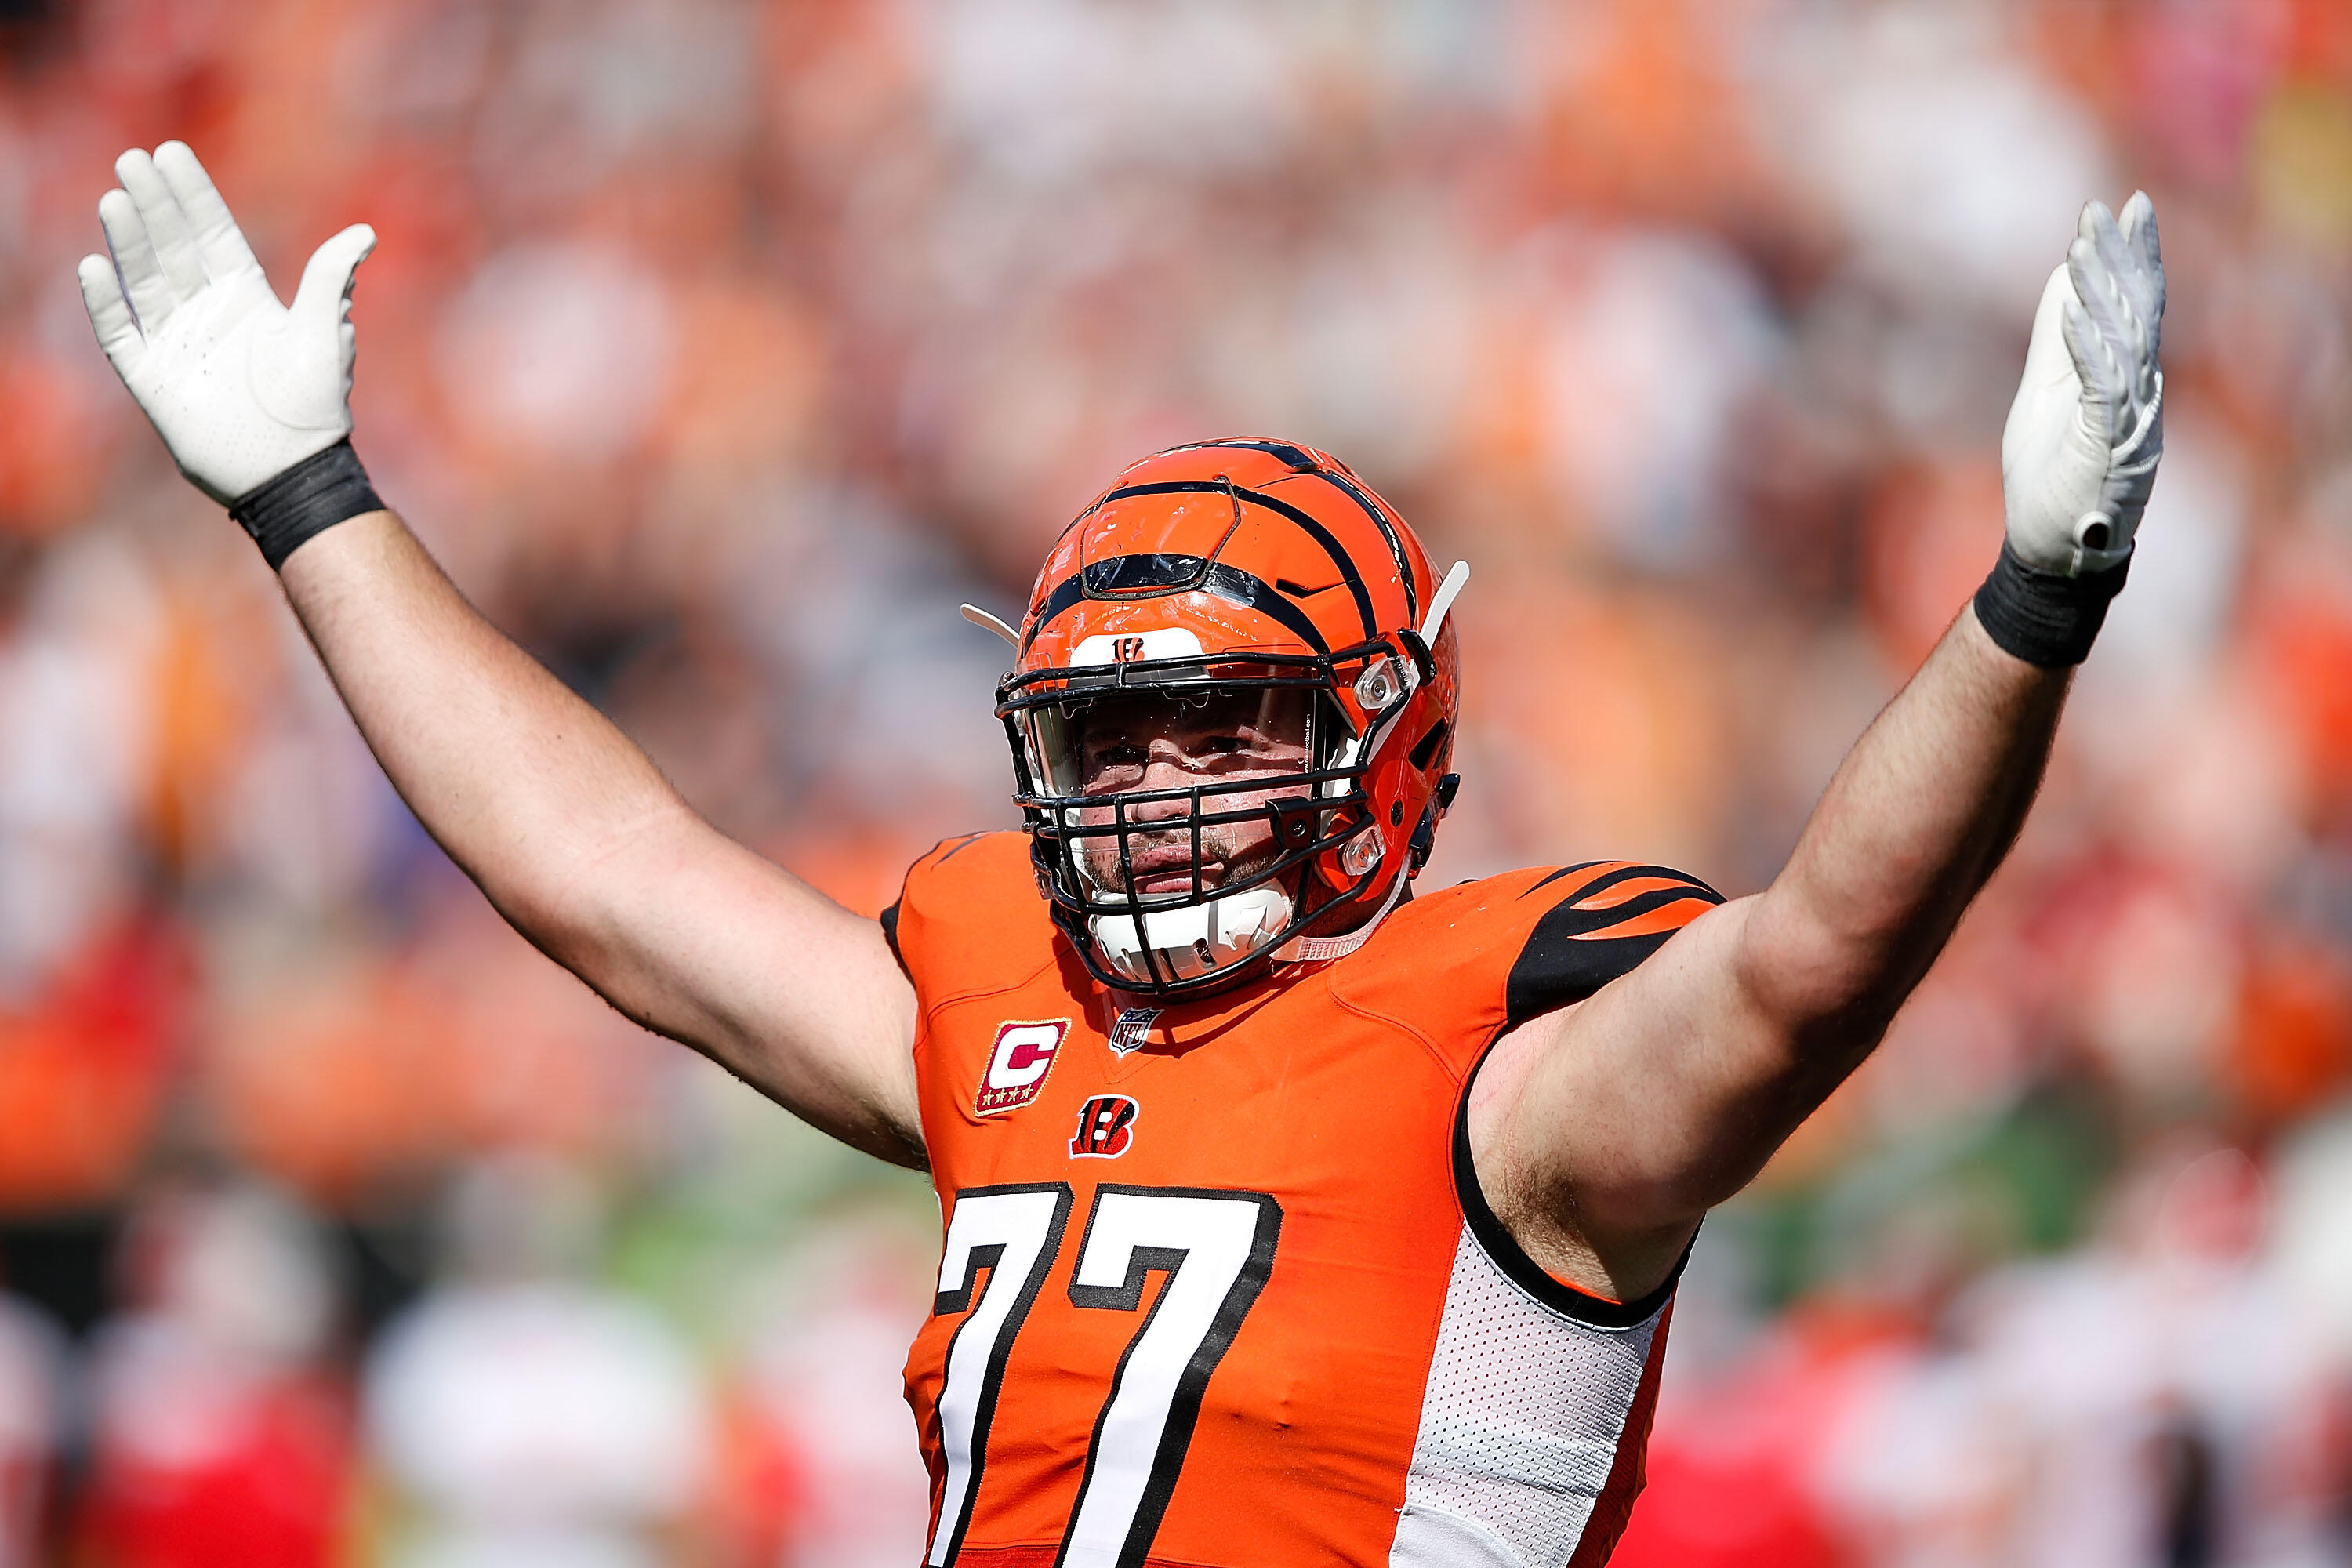 CINCINNATI, OH - OCTOBER 4:  Andrew Whitworth #77 of the Cincinnati Bengals attempts to excite the crowd during the third quarter of the game against the Kansas City Chiefs at Paul Brown Stadium on October 4, 2015 in Cincinnati, Ohio. (Photo by Joe Robbin